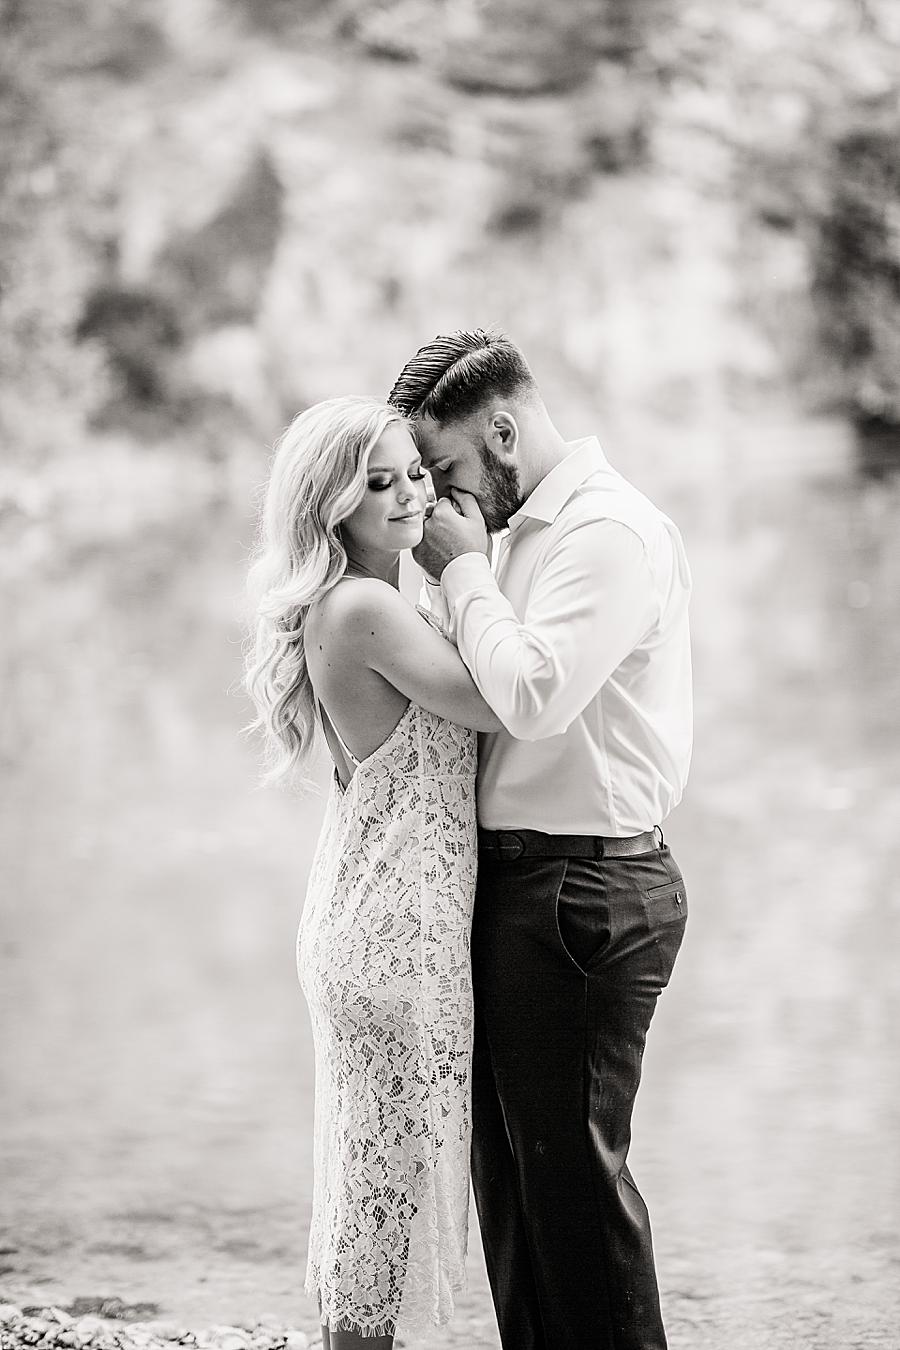 Black and white at this Meads Quarry engagement by Knoxville Wedding Photographer, Amanda May Photos.